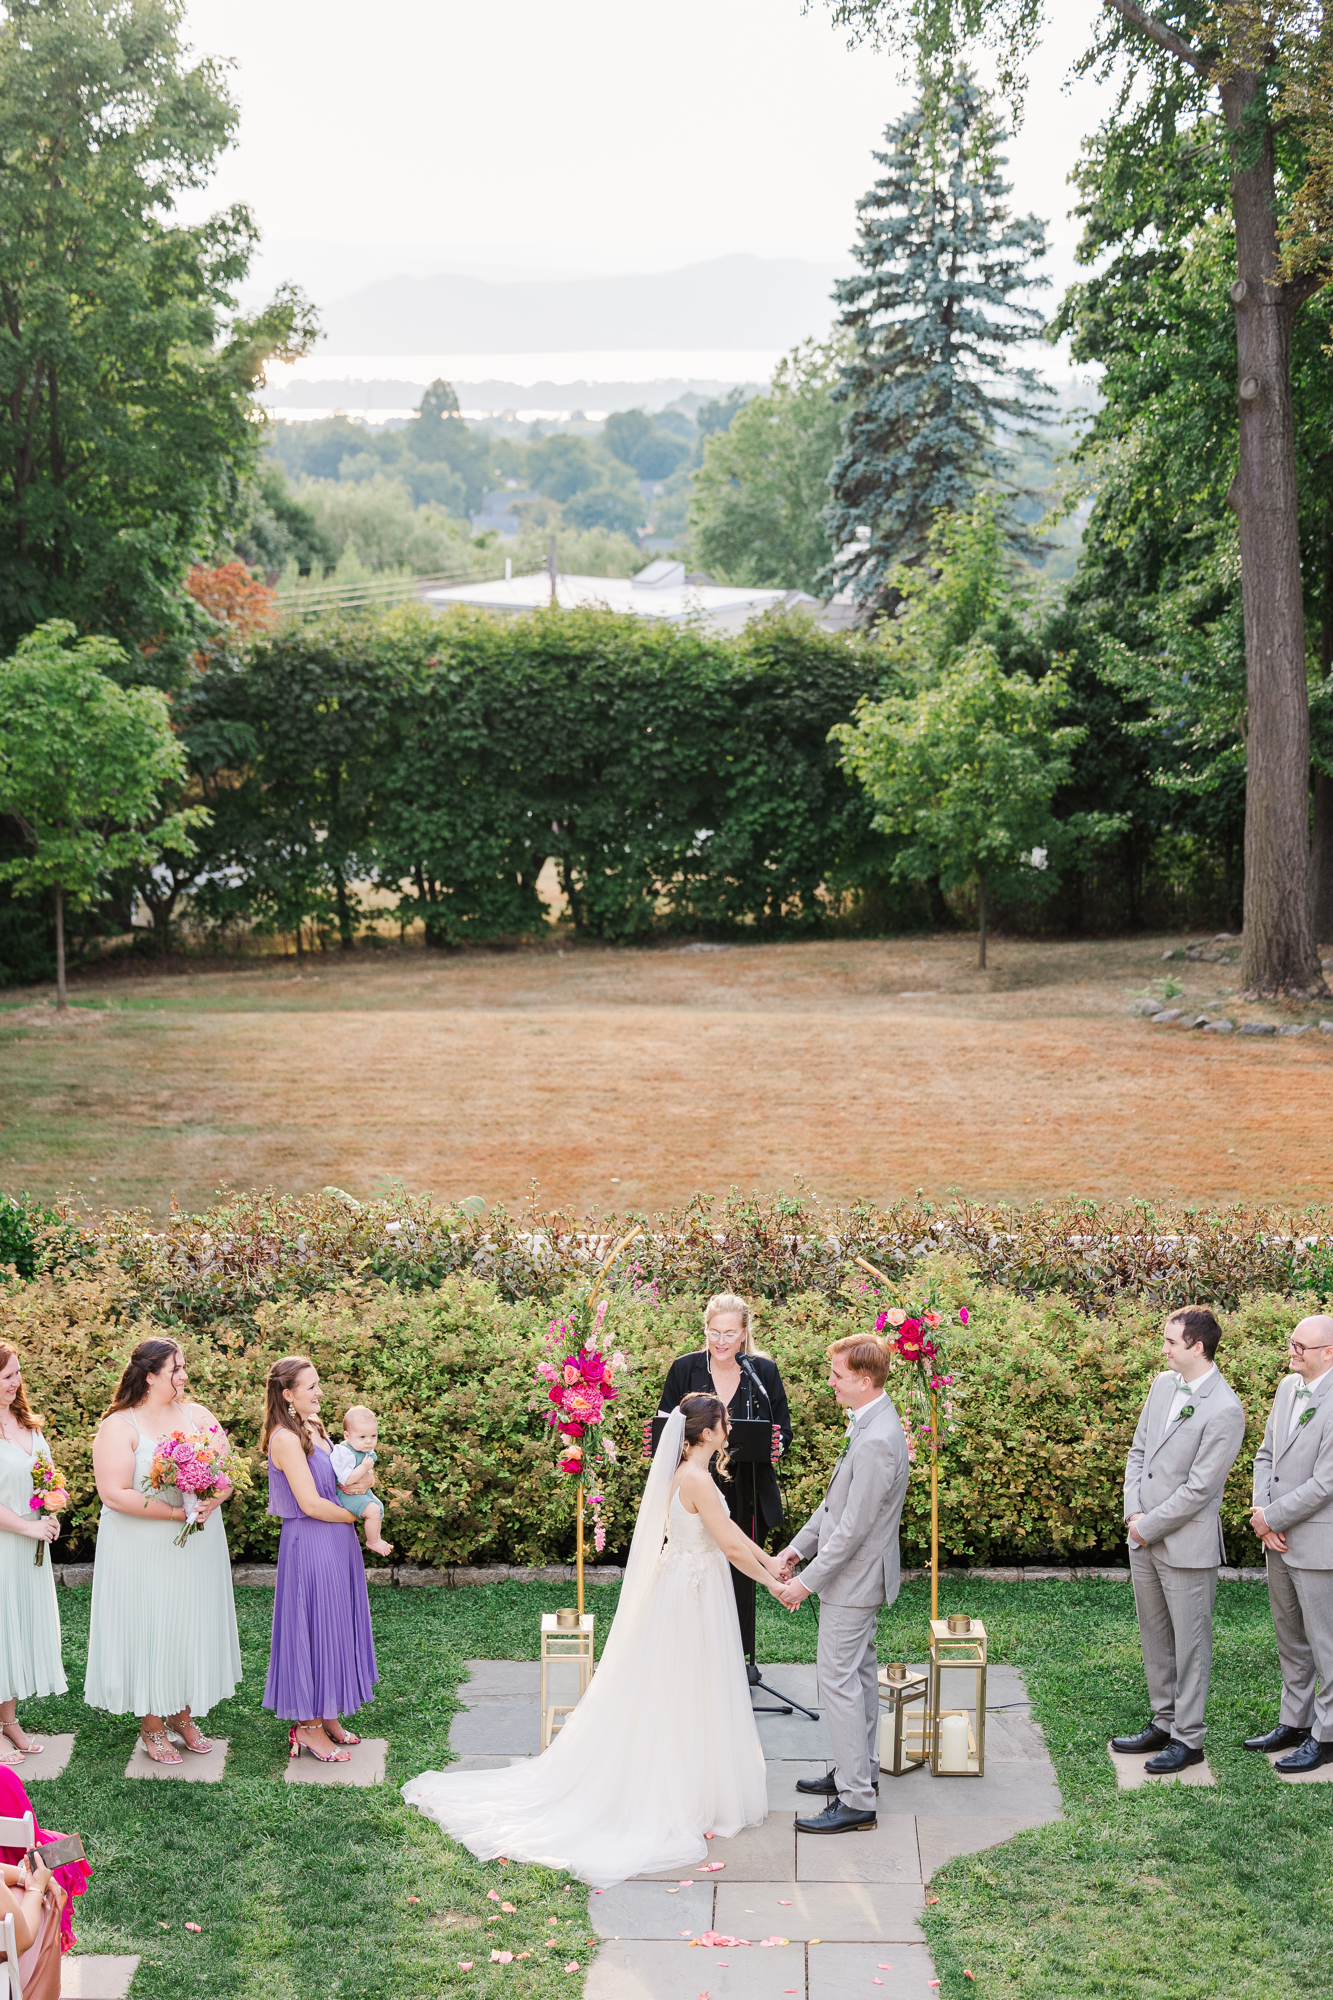 Striking Wedding at Briarcliff Manor in Summertime